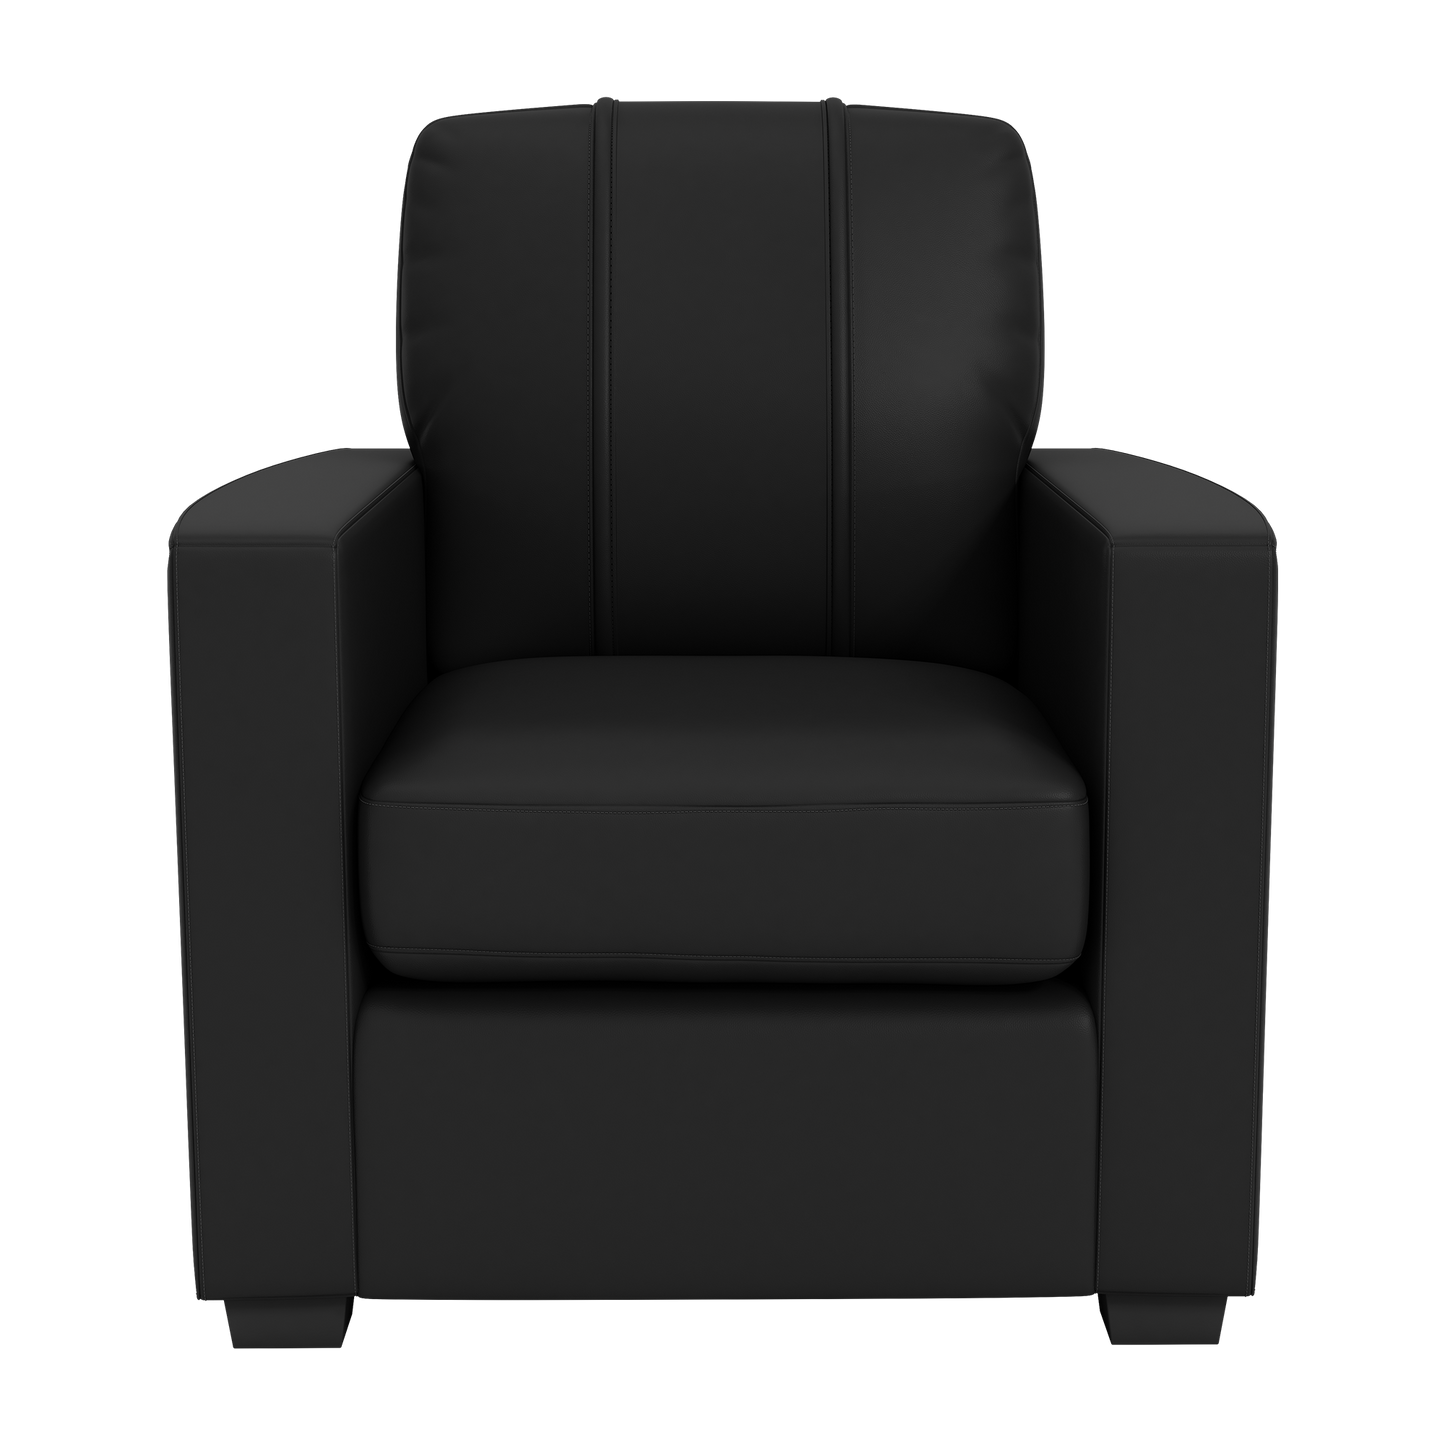 Silver Club Chair with Shoulda Been Stars Icon Logo